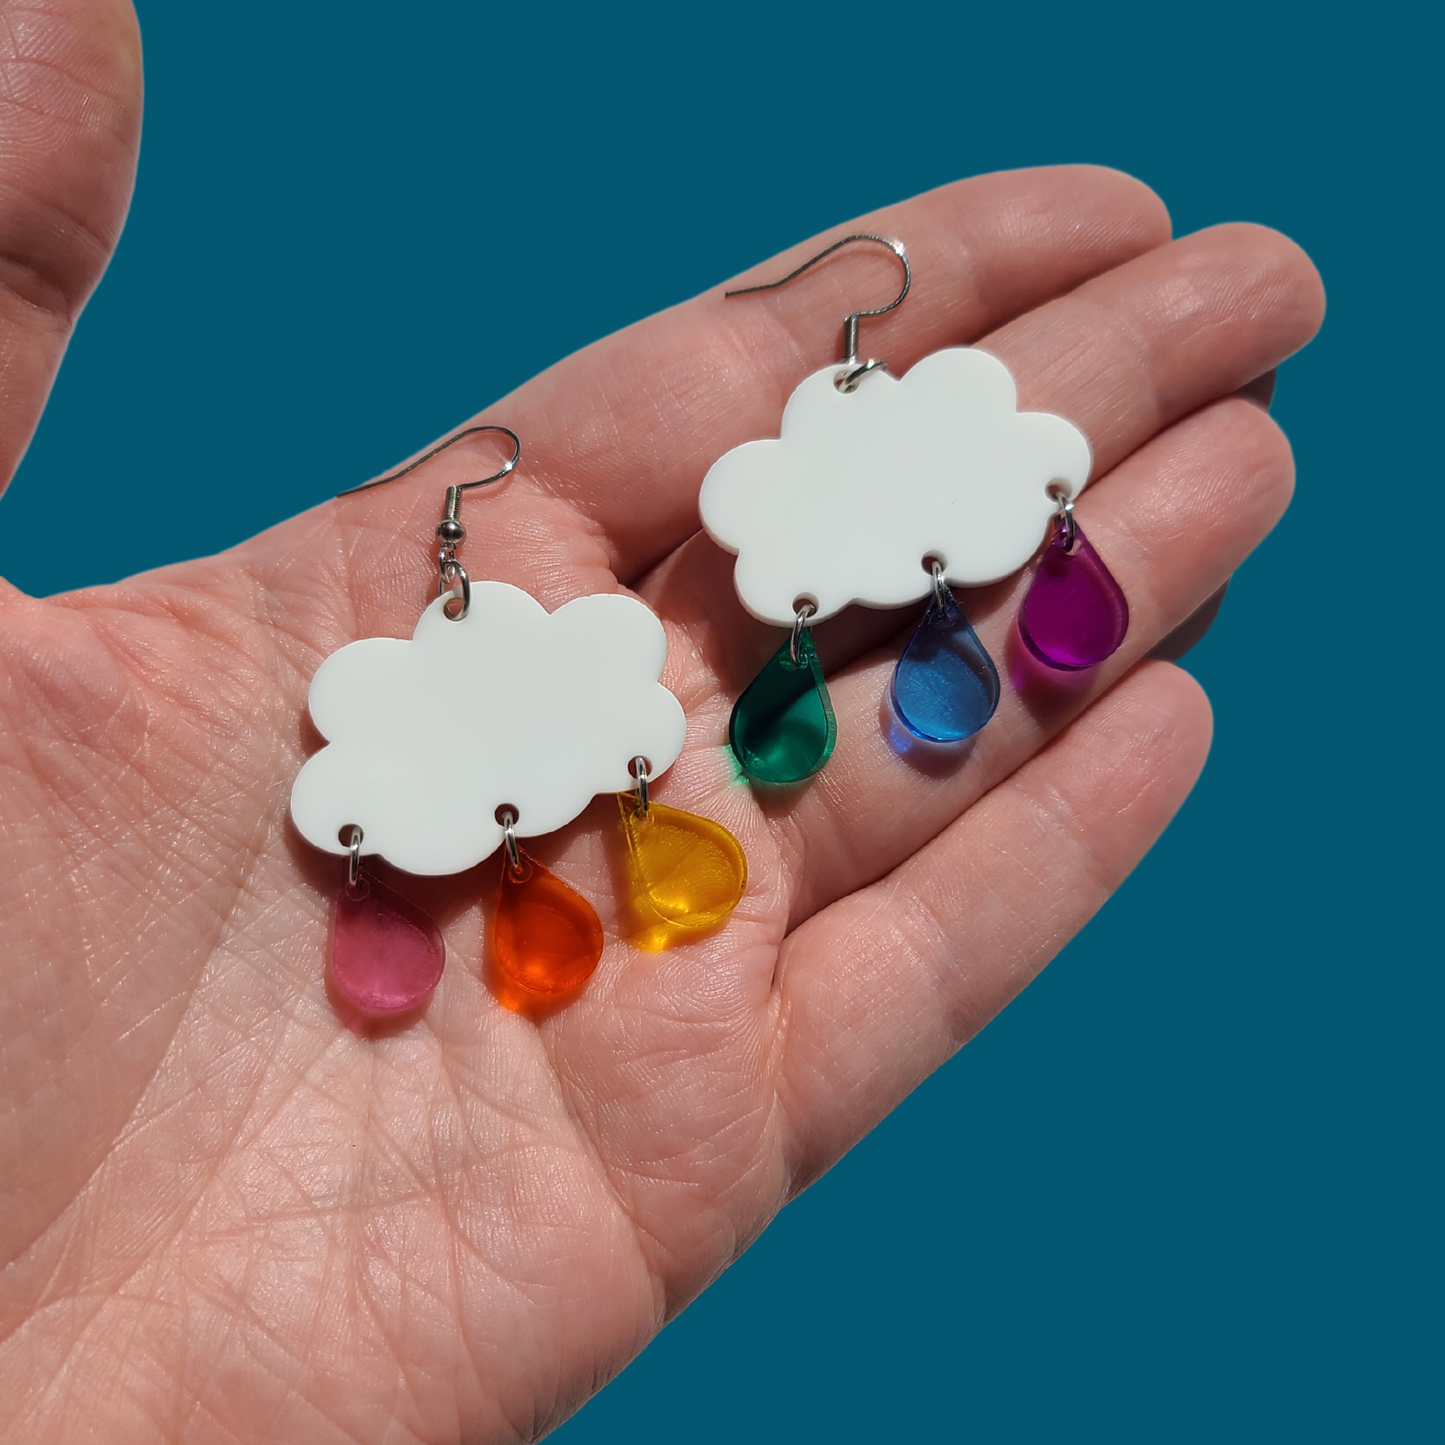 White Clouds with Rainbow Translucent Raindrops - Earrings - Laser Cut